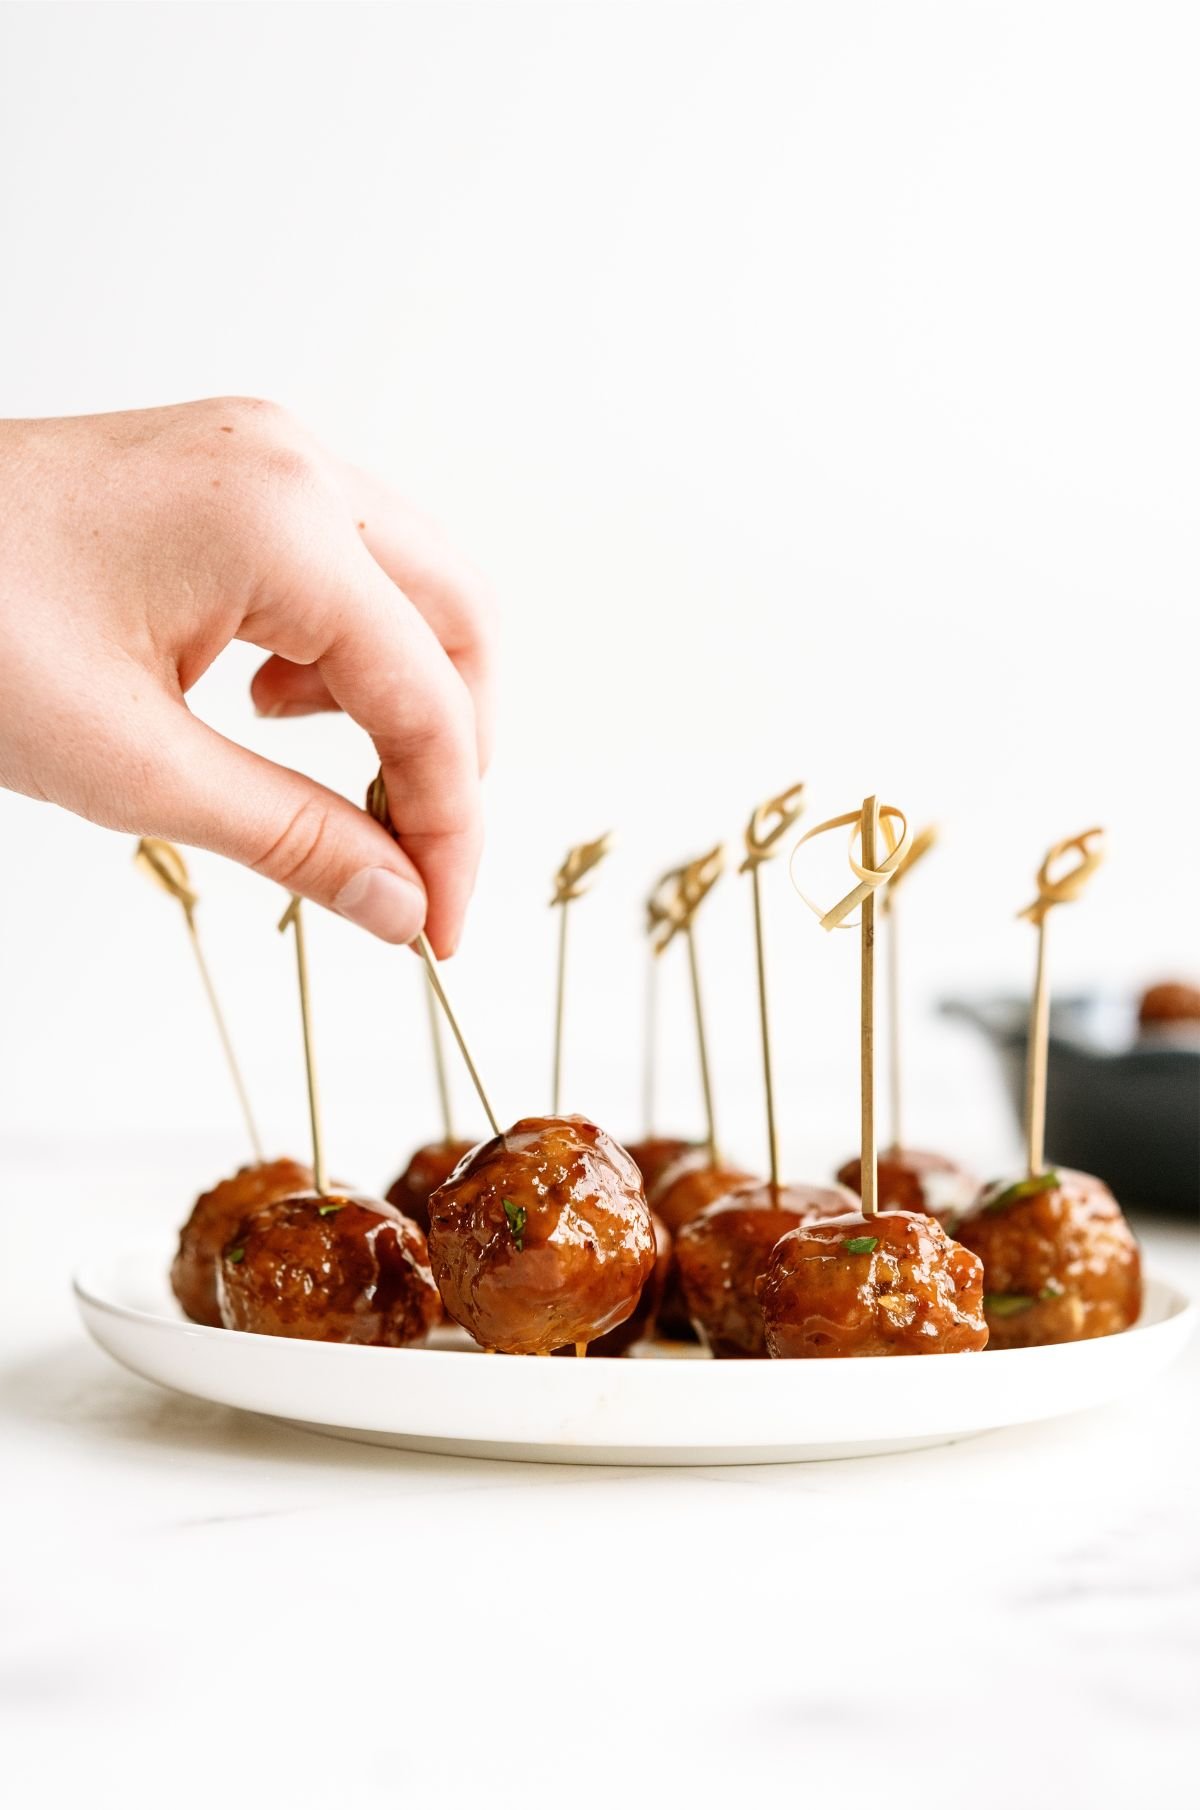 Slow Cooker Honey Buffalo Meatballs on a serving plate with toothpicks.  A hand picking up one of the meatballs